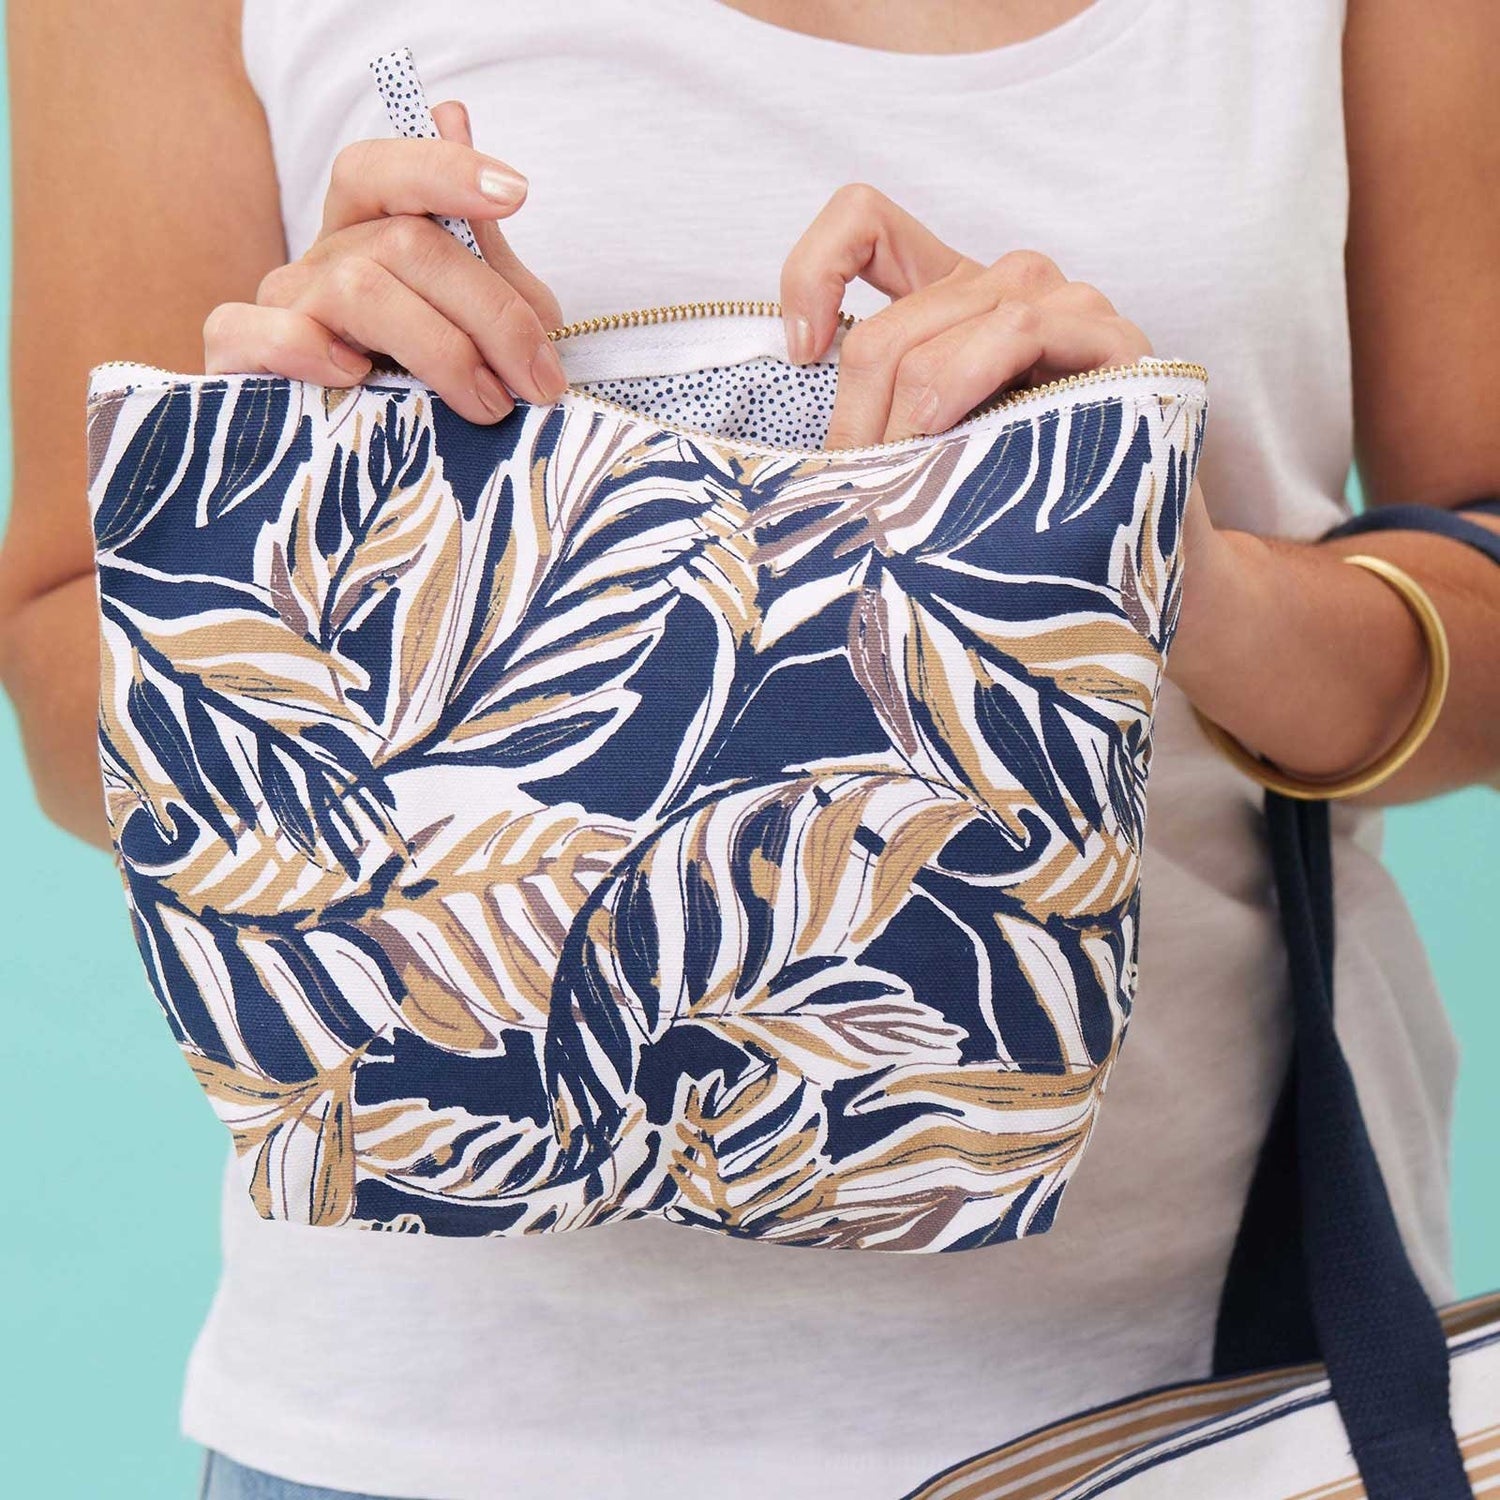 Tropic Navy Tan Large Relaxed Pouch Pouch - rockflowerpaper